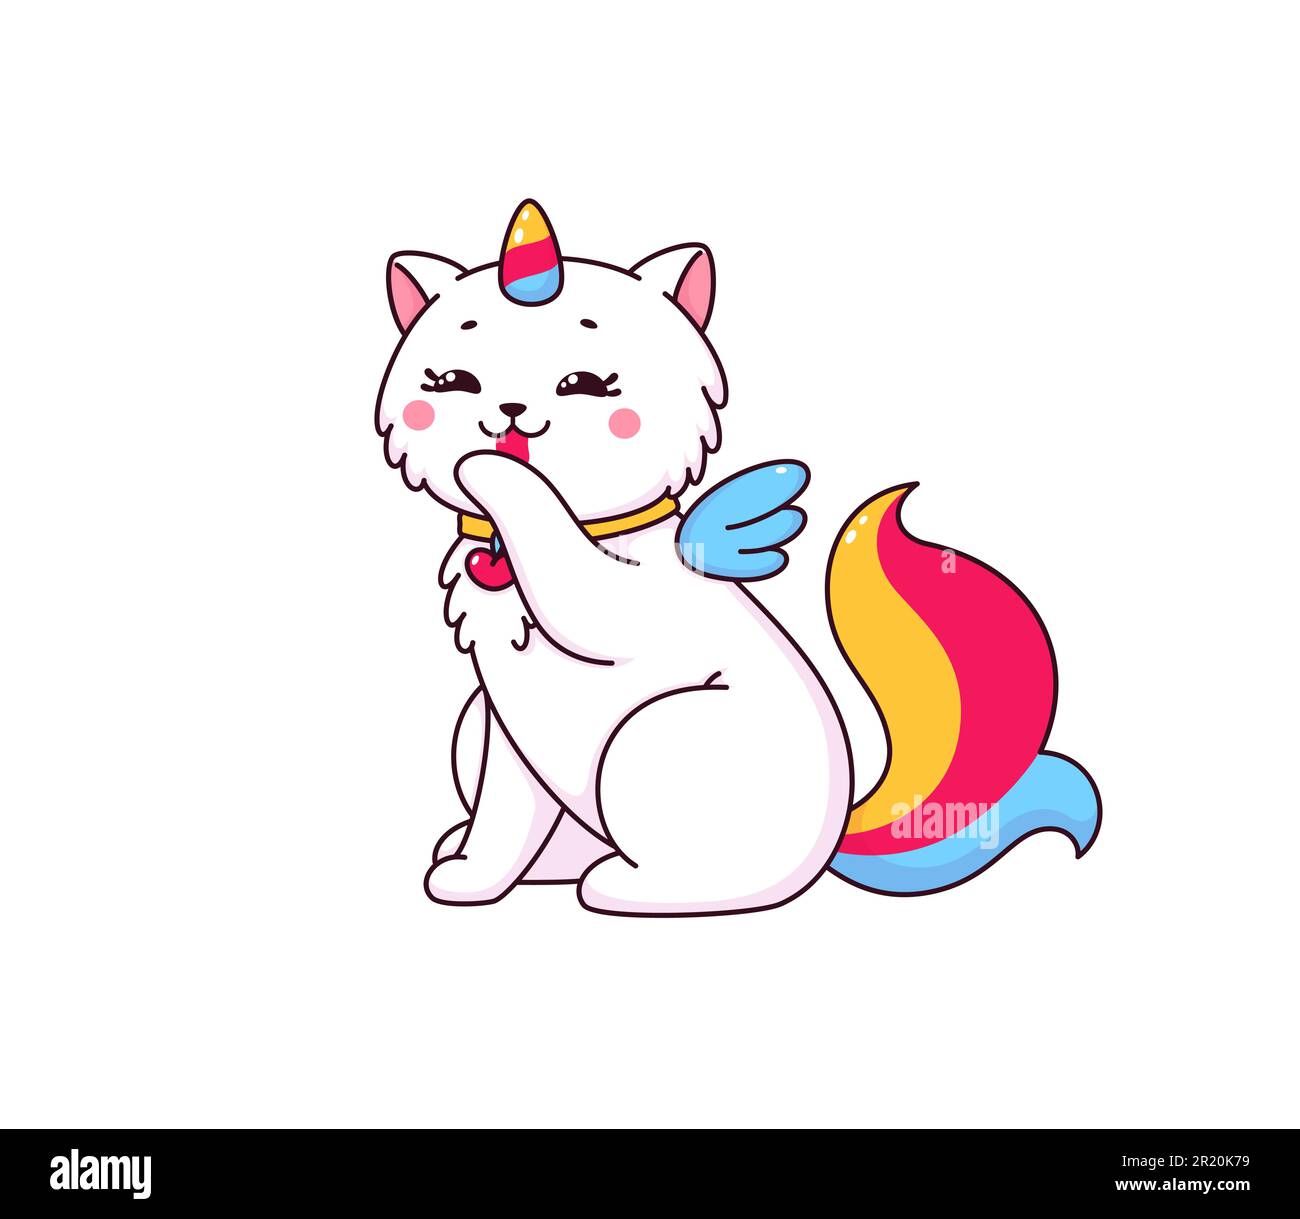 Cartoon cute caticorn character with rainbow unicorn horn and tail licking its paw. Vector magic cat or fluffy white kitten personage cleaning itself with tongue. Kawaii caticorn pet animal emoticon Stock Vector